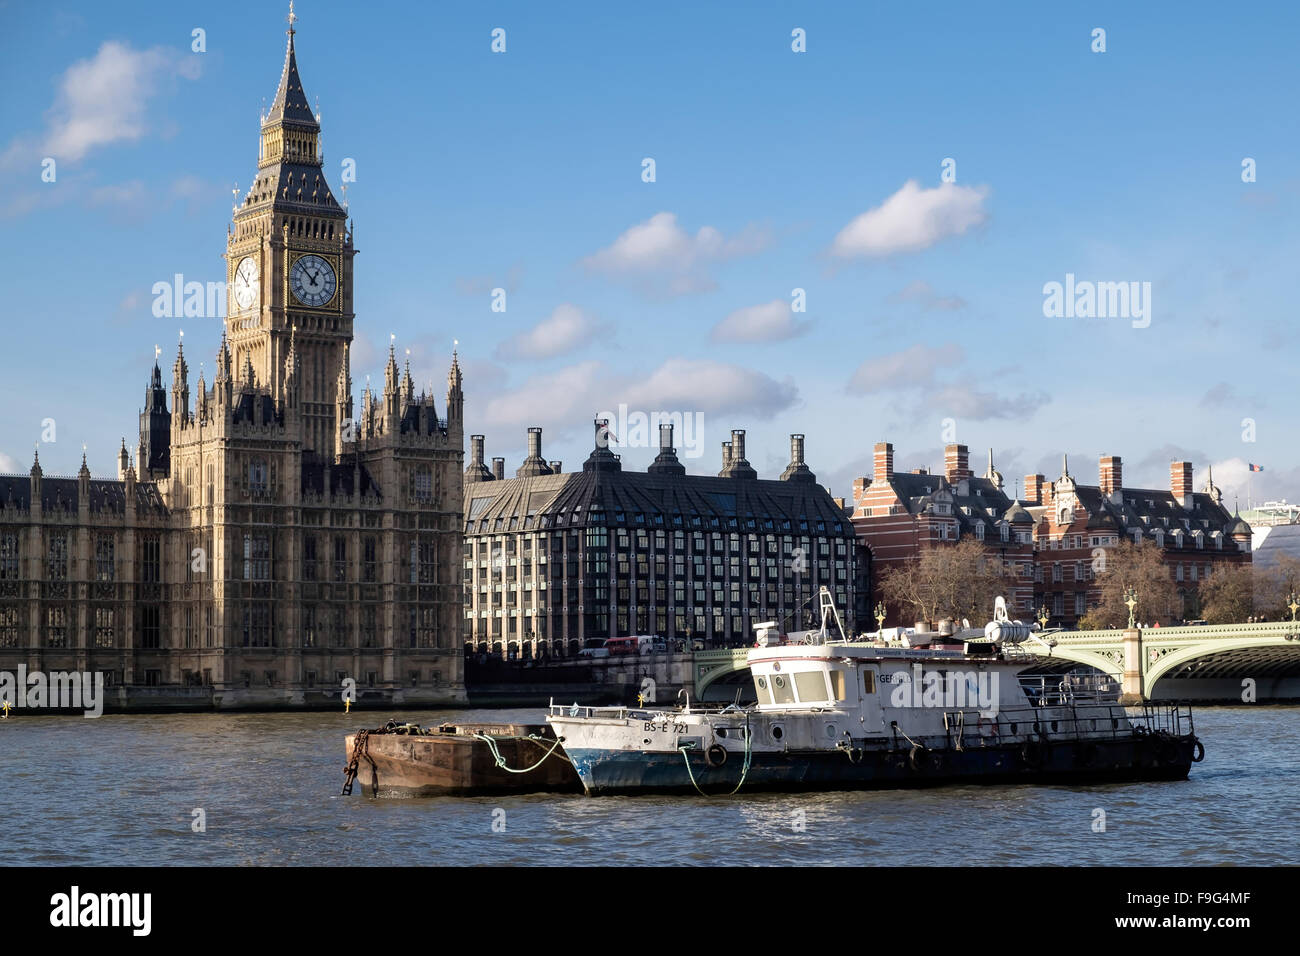 Working Boats in Front of the Houses of Parliament Stock Photo